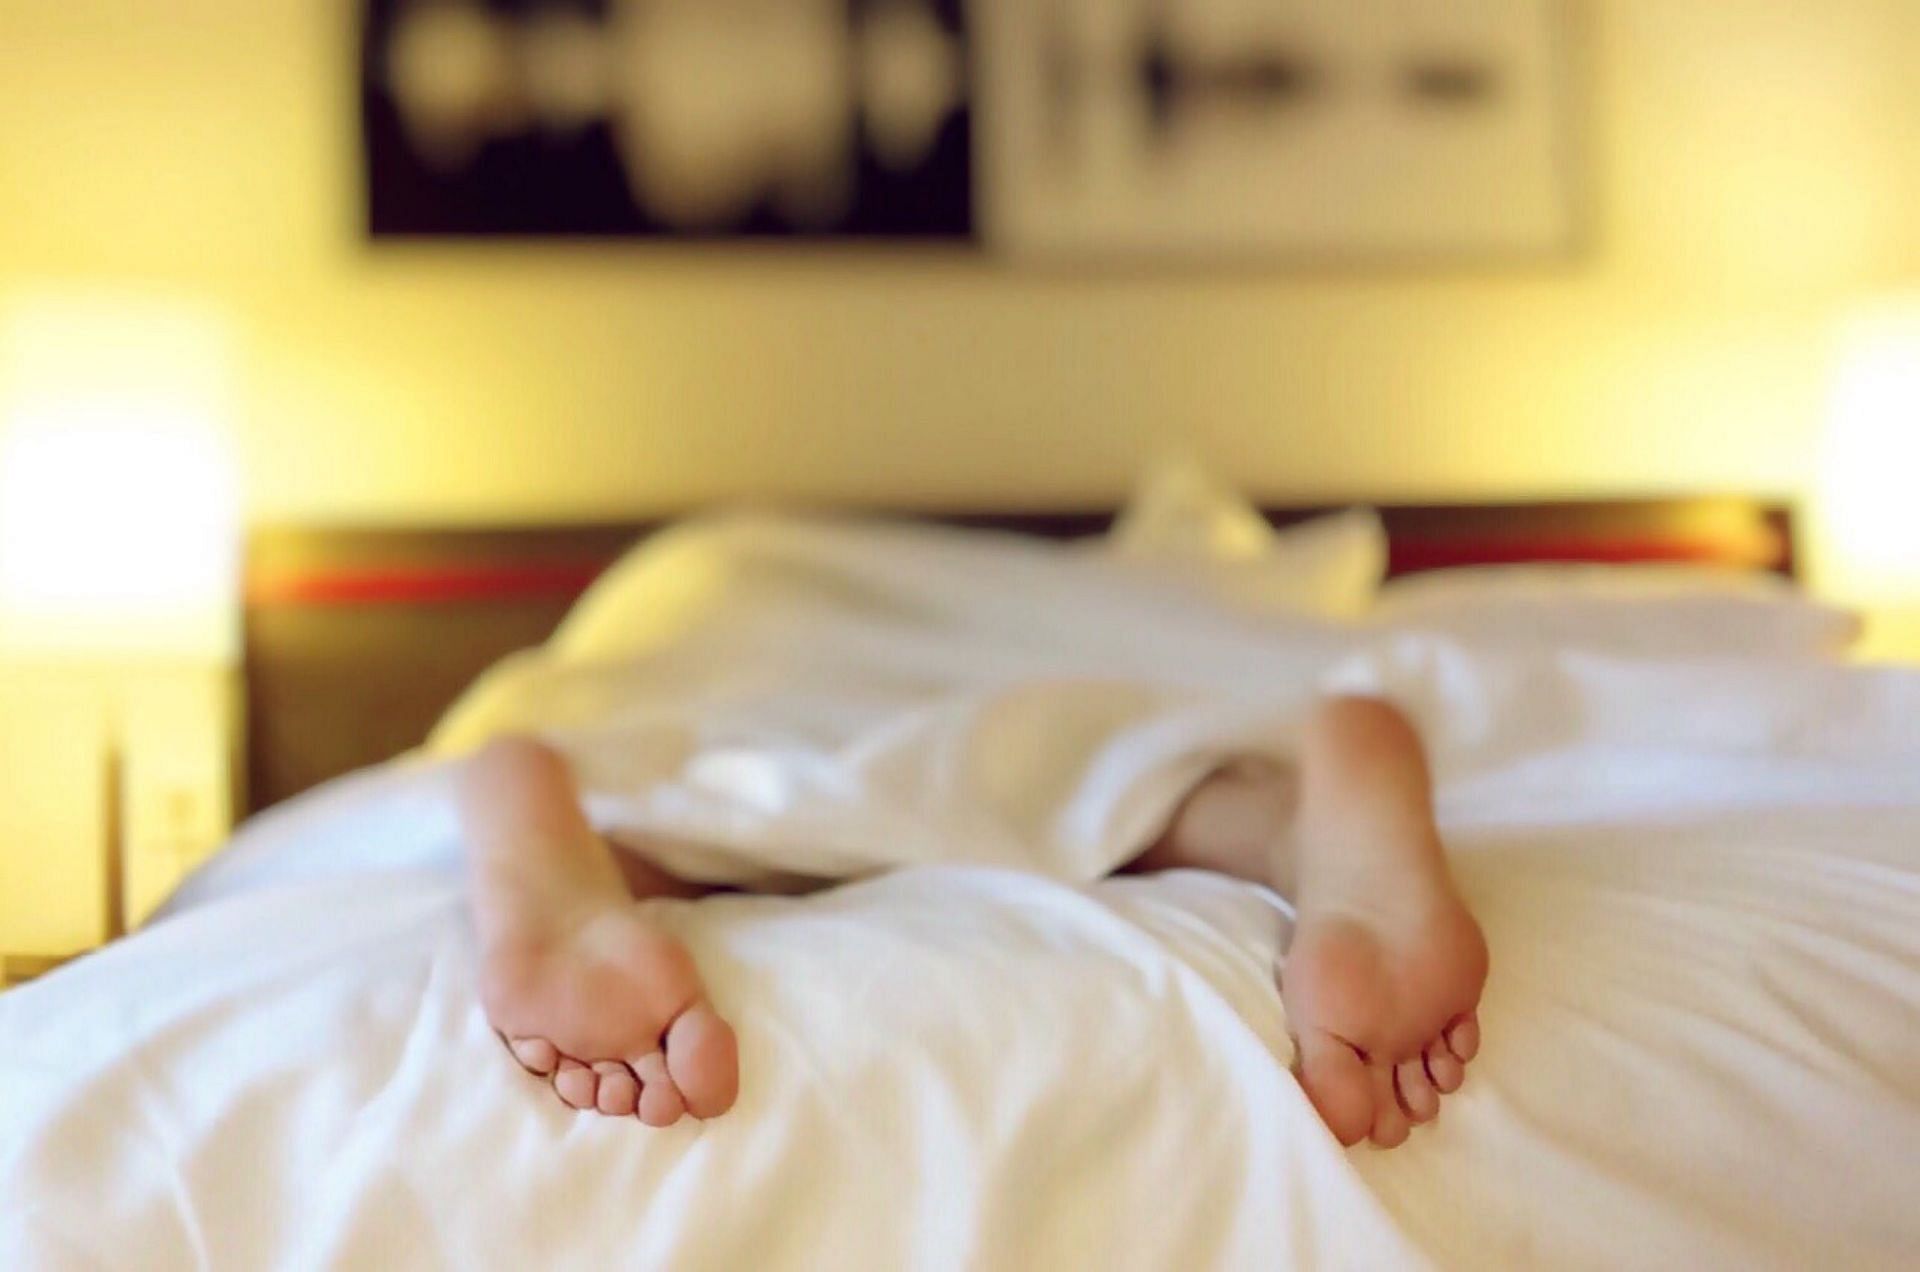 Importance of water bed (image sourced via Pexels / Photo by pixabay)